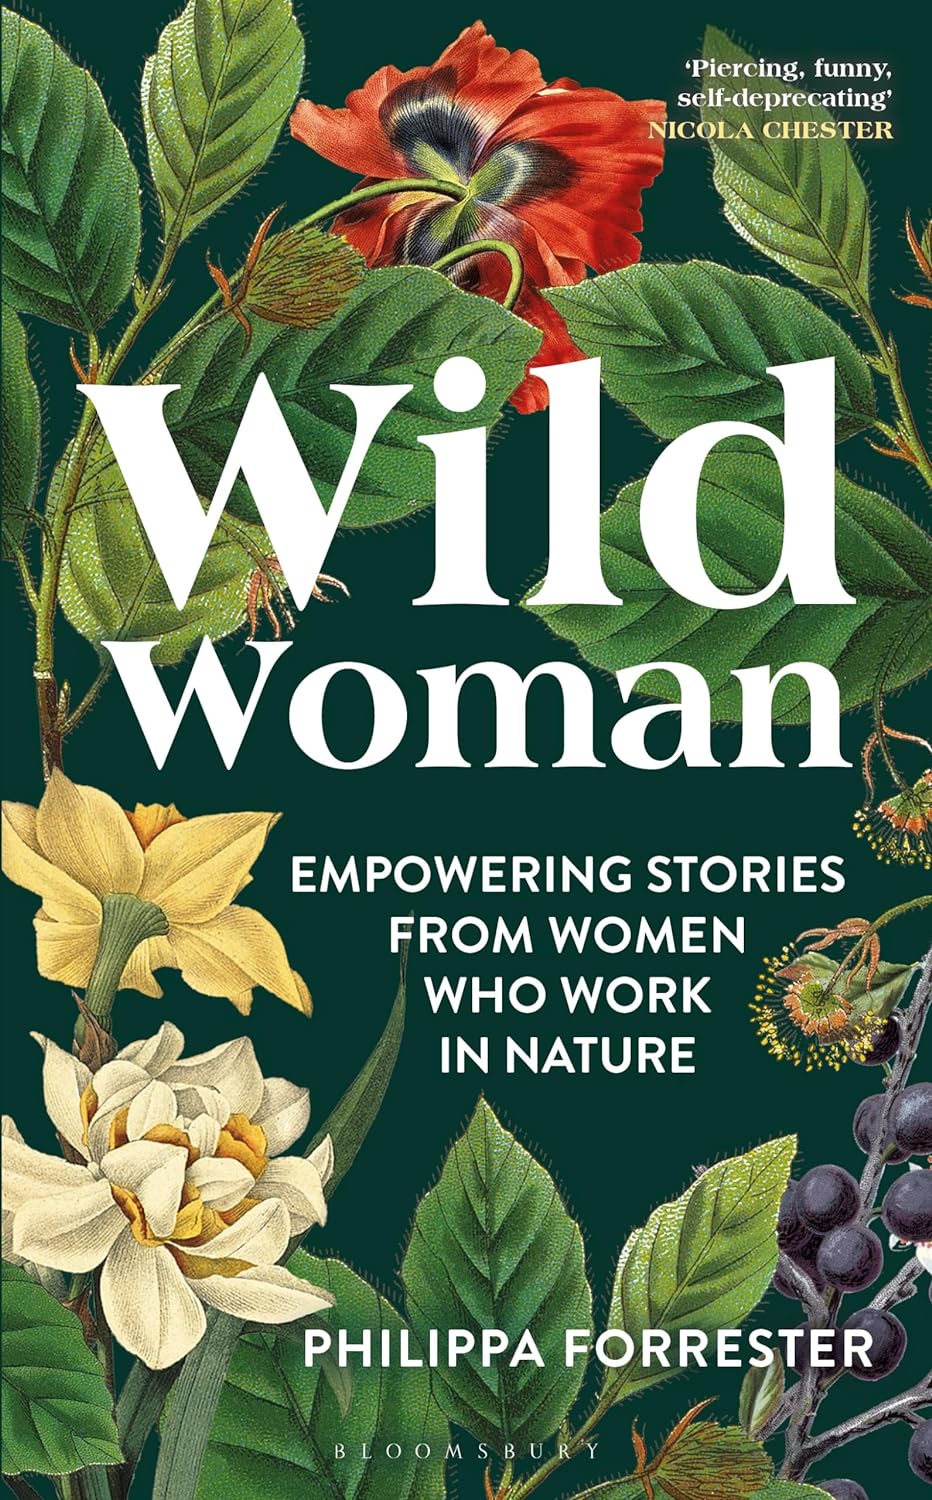 stories from women who work in nature